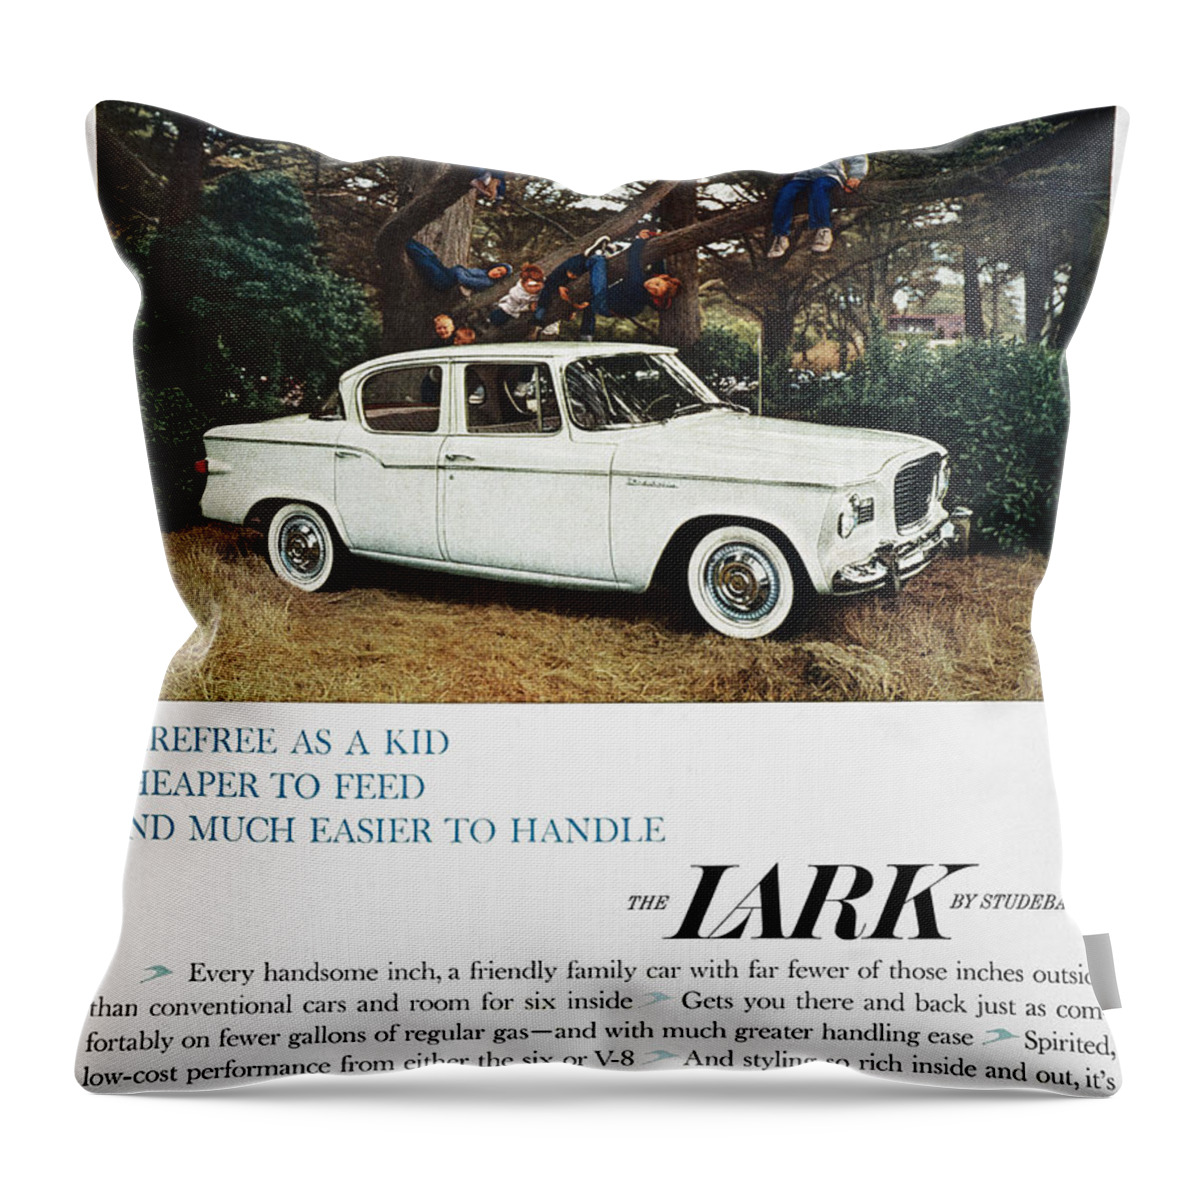 1959 Throw Pillow featuring the photograph Studebaker Ad, 1959 by Granger